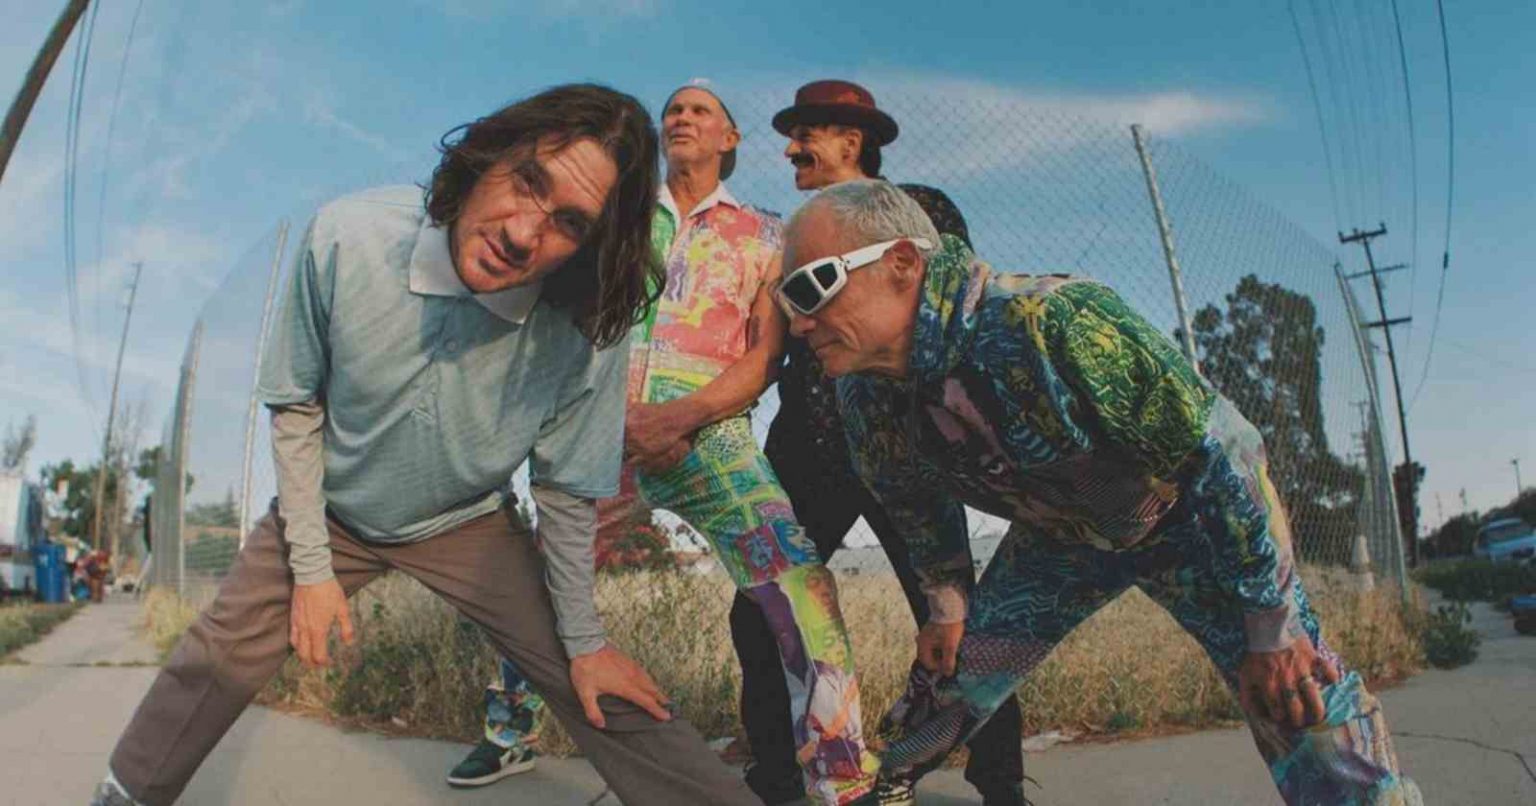 Red Hot Chili Peppers announce 2023 tour dates